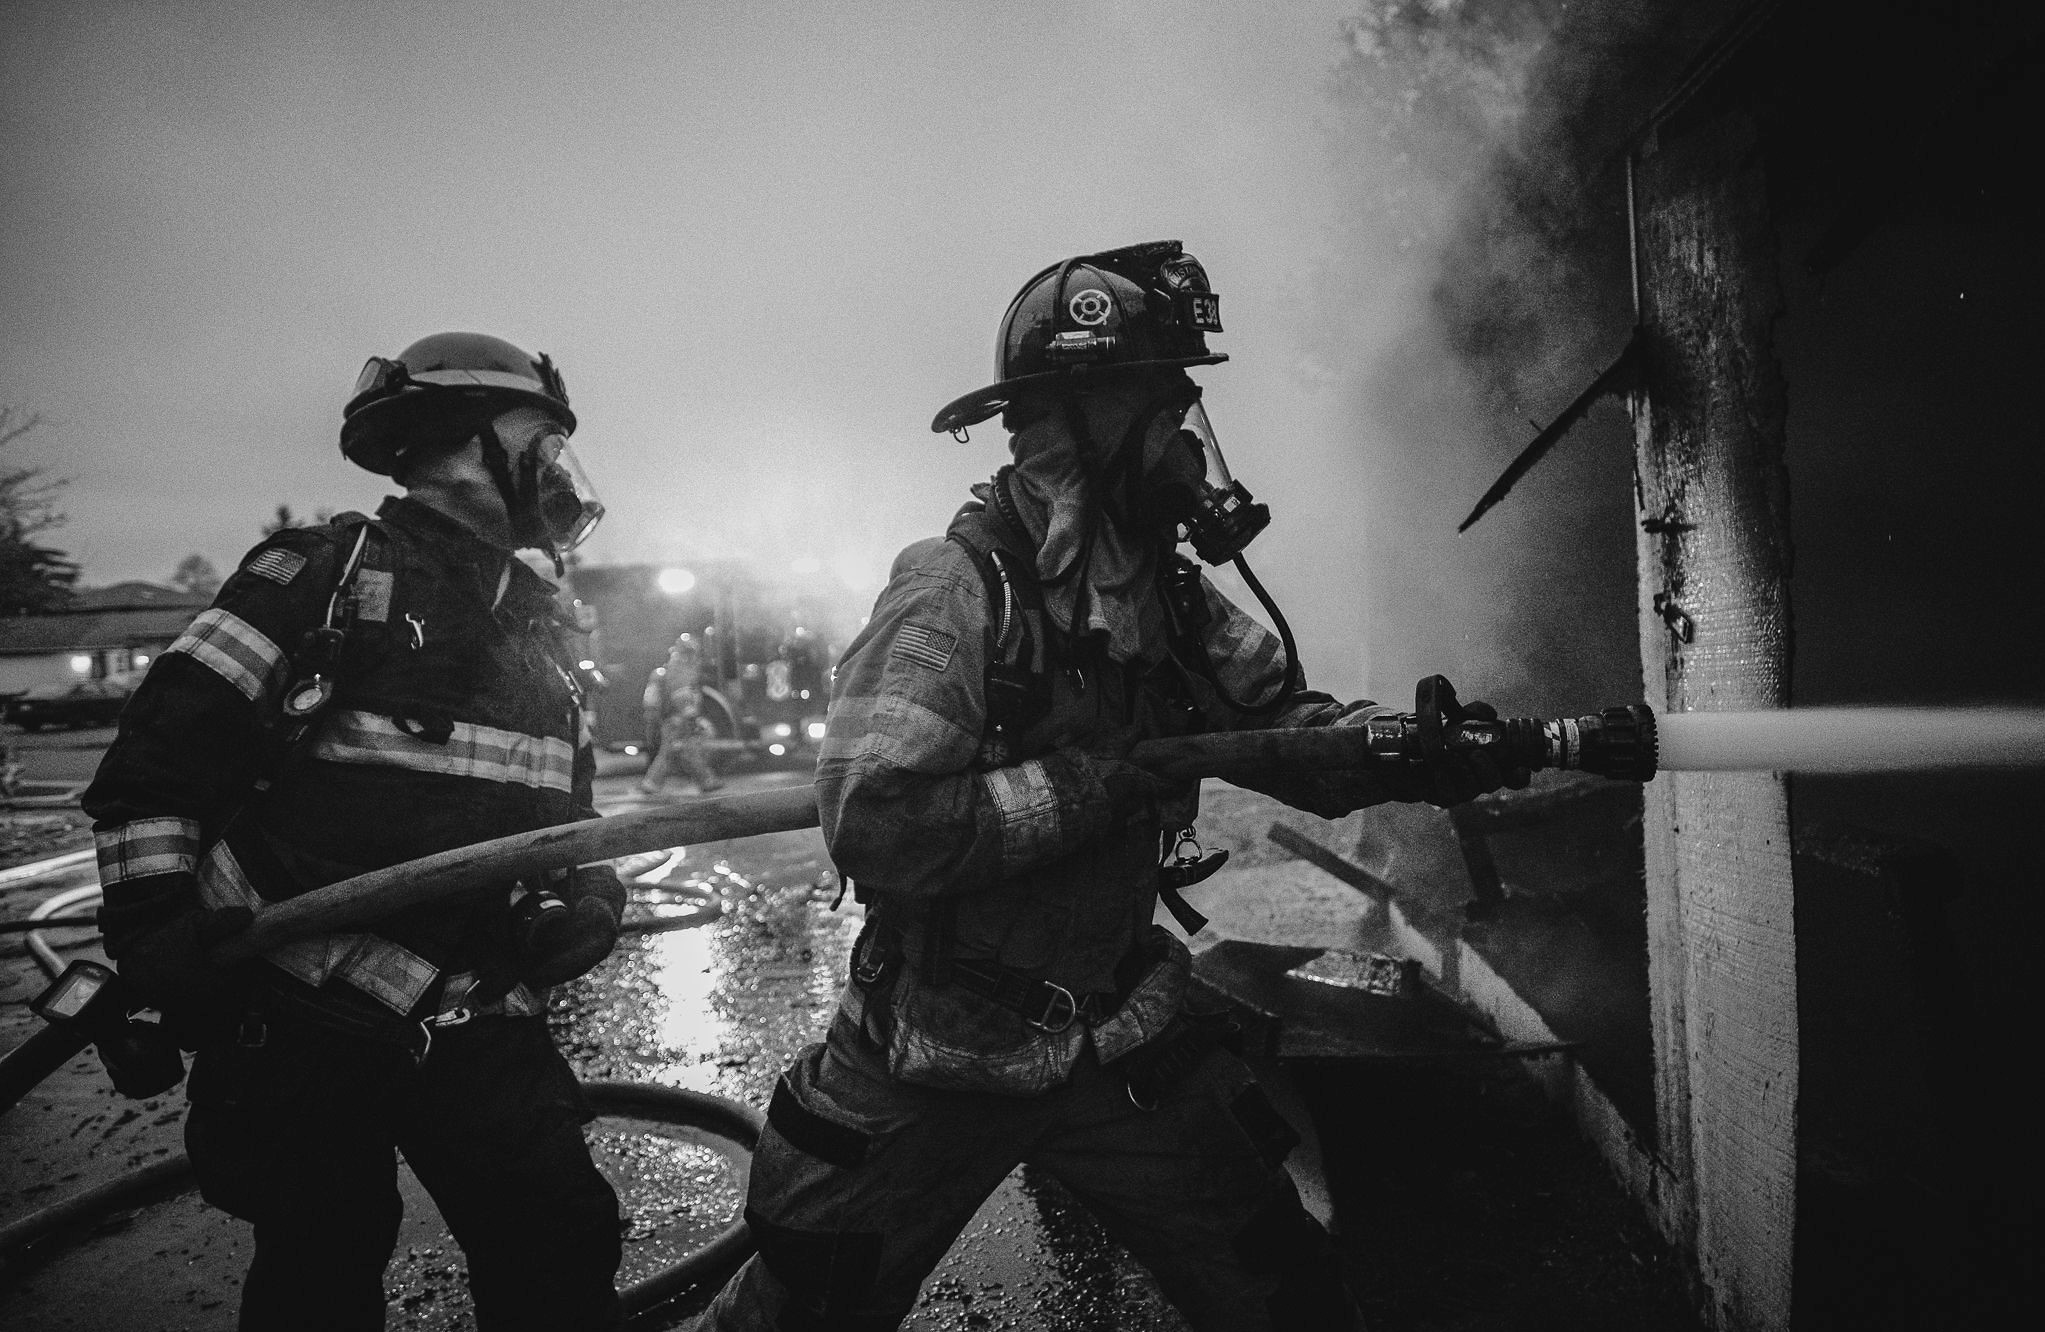 Two firemen from the Valley Regional Fire Authority fighting a fire in a black and white photo.